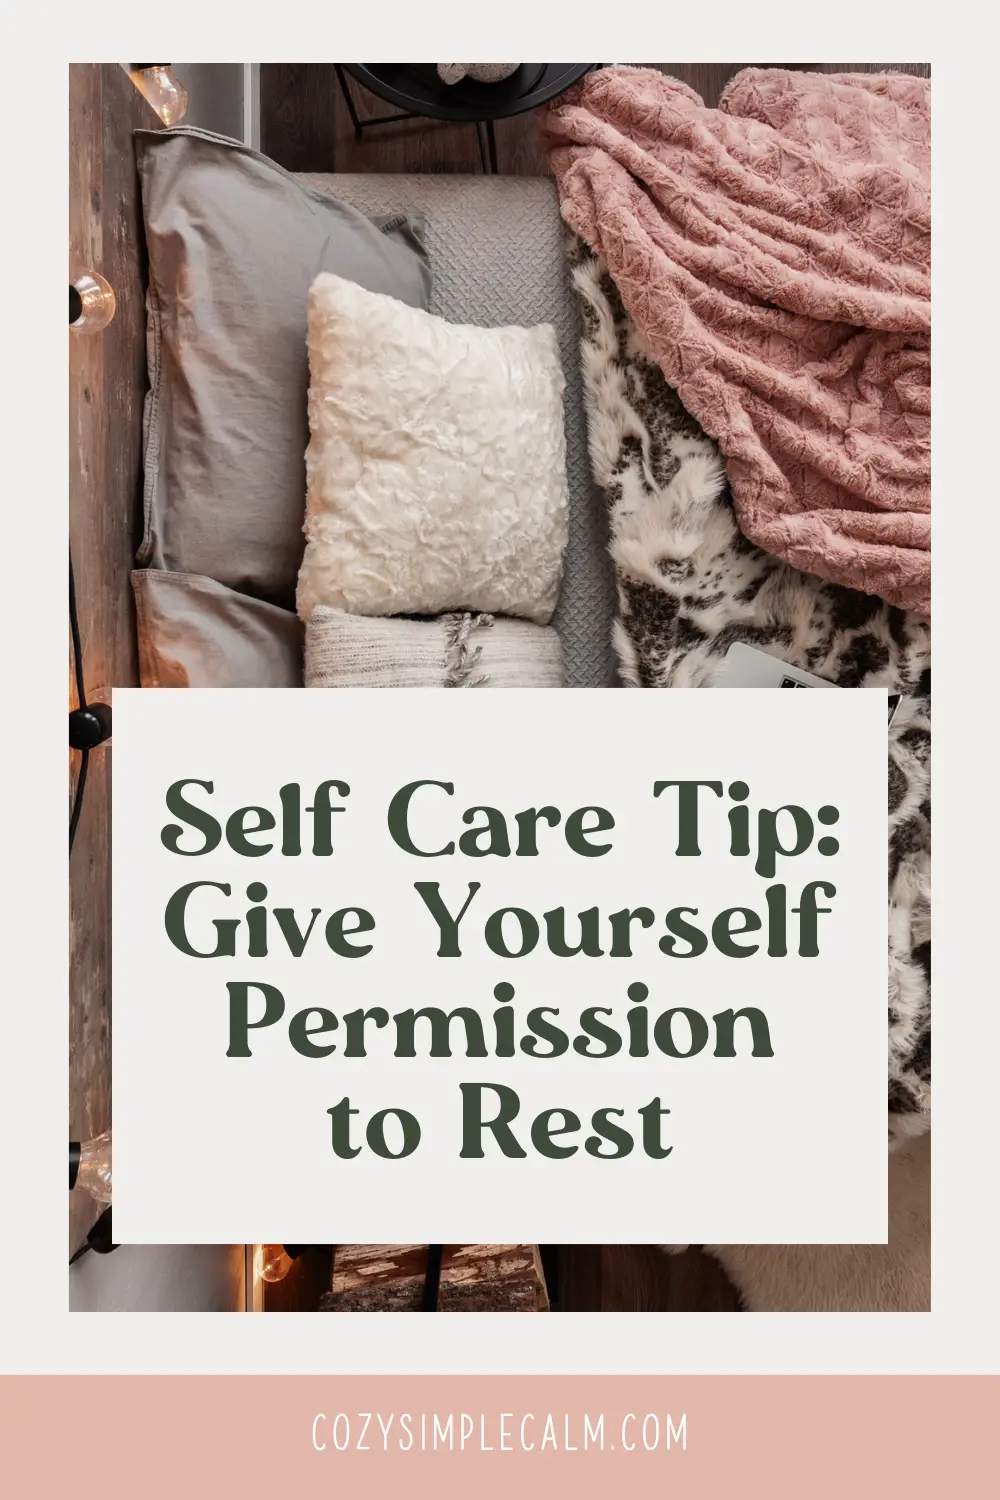 Image of bed from above, with fuzzy blankets and pillows - Text overlay: Self Care Tip, give yourself permission to rest - cozysimplecalm.com